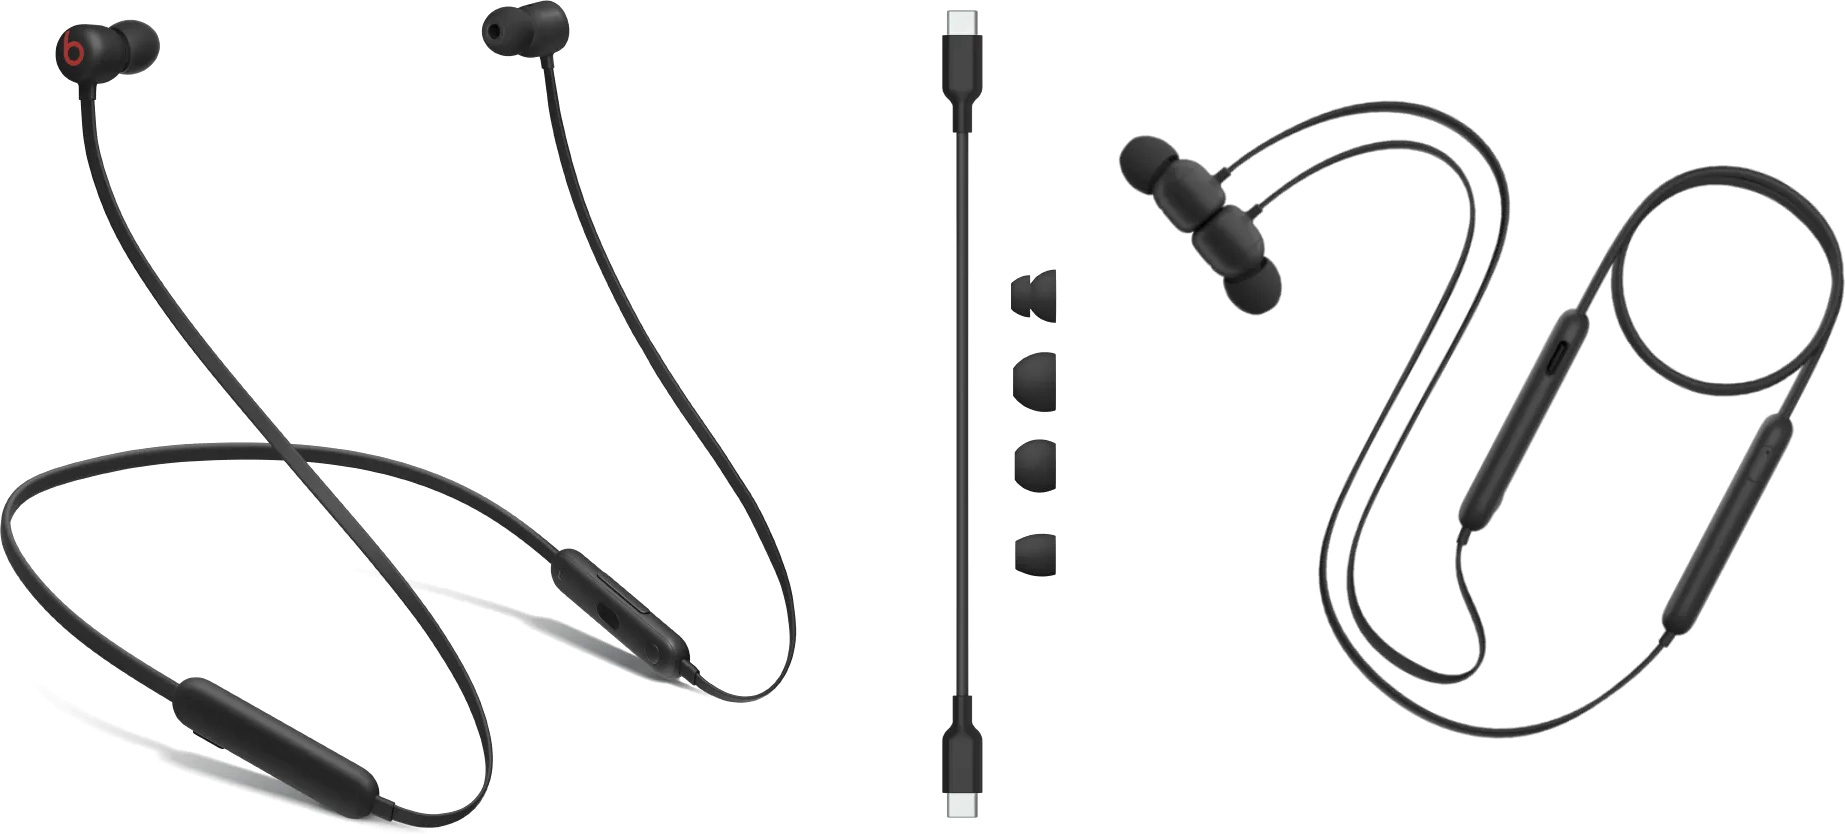 beatsx connect to android